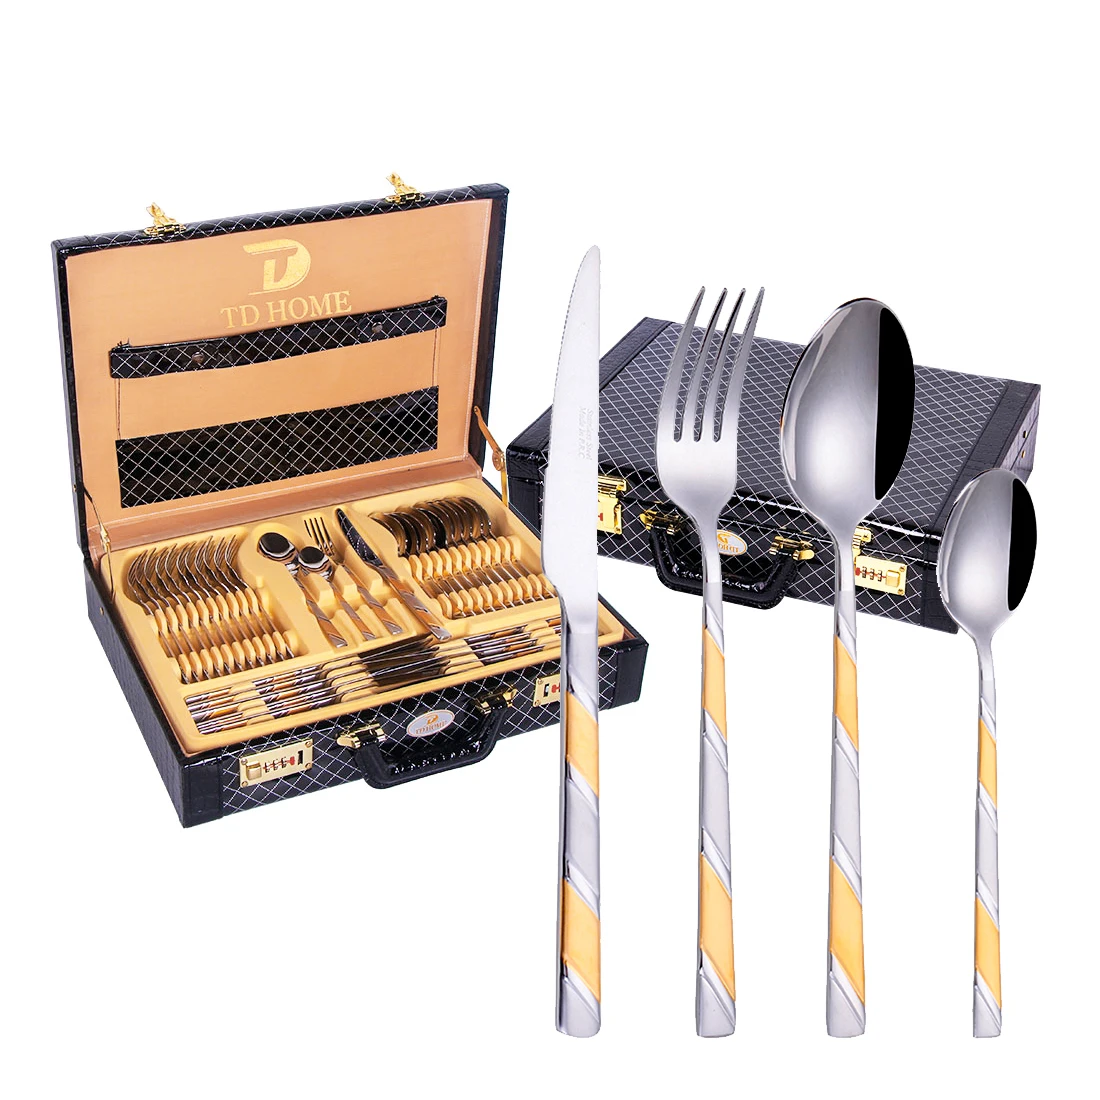 

72 piece Gottinghen Stainless Steel Flatware Gold 86 Pcs Cutlery Set with leather case 72pcs cutelry set with aluminum case